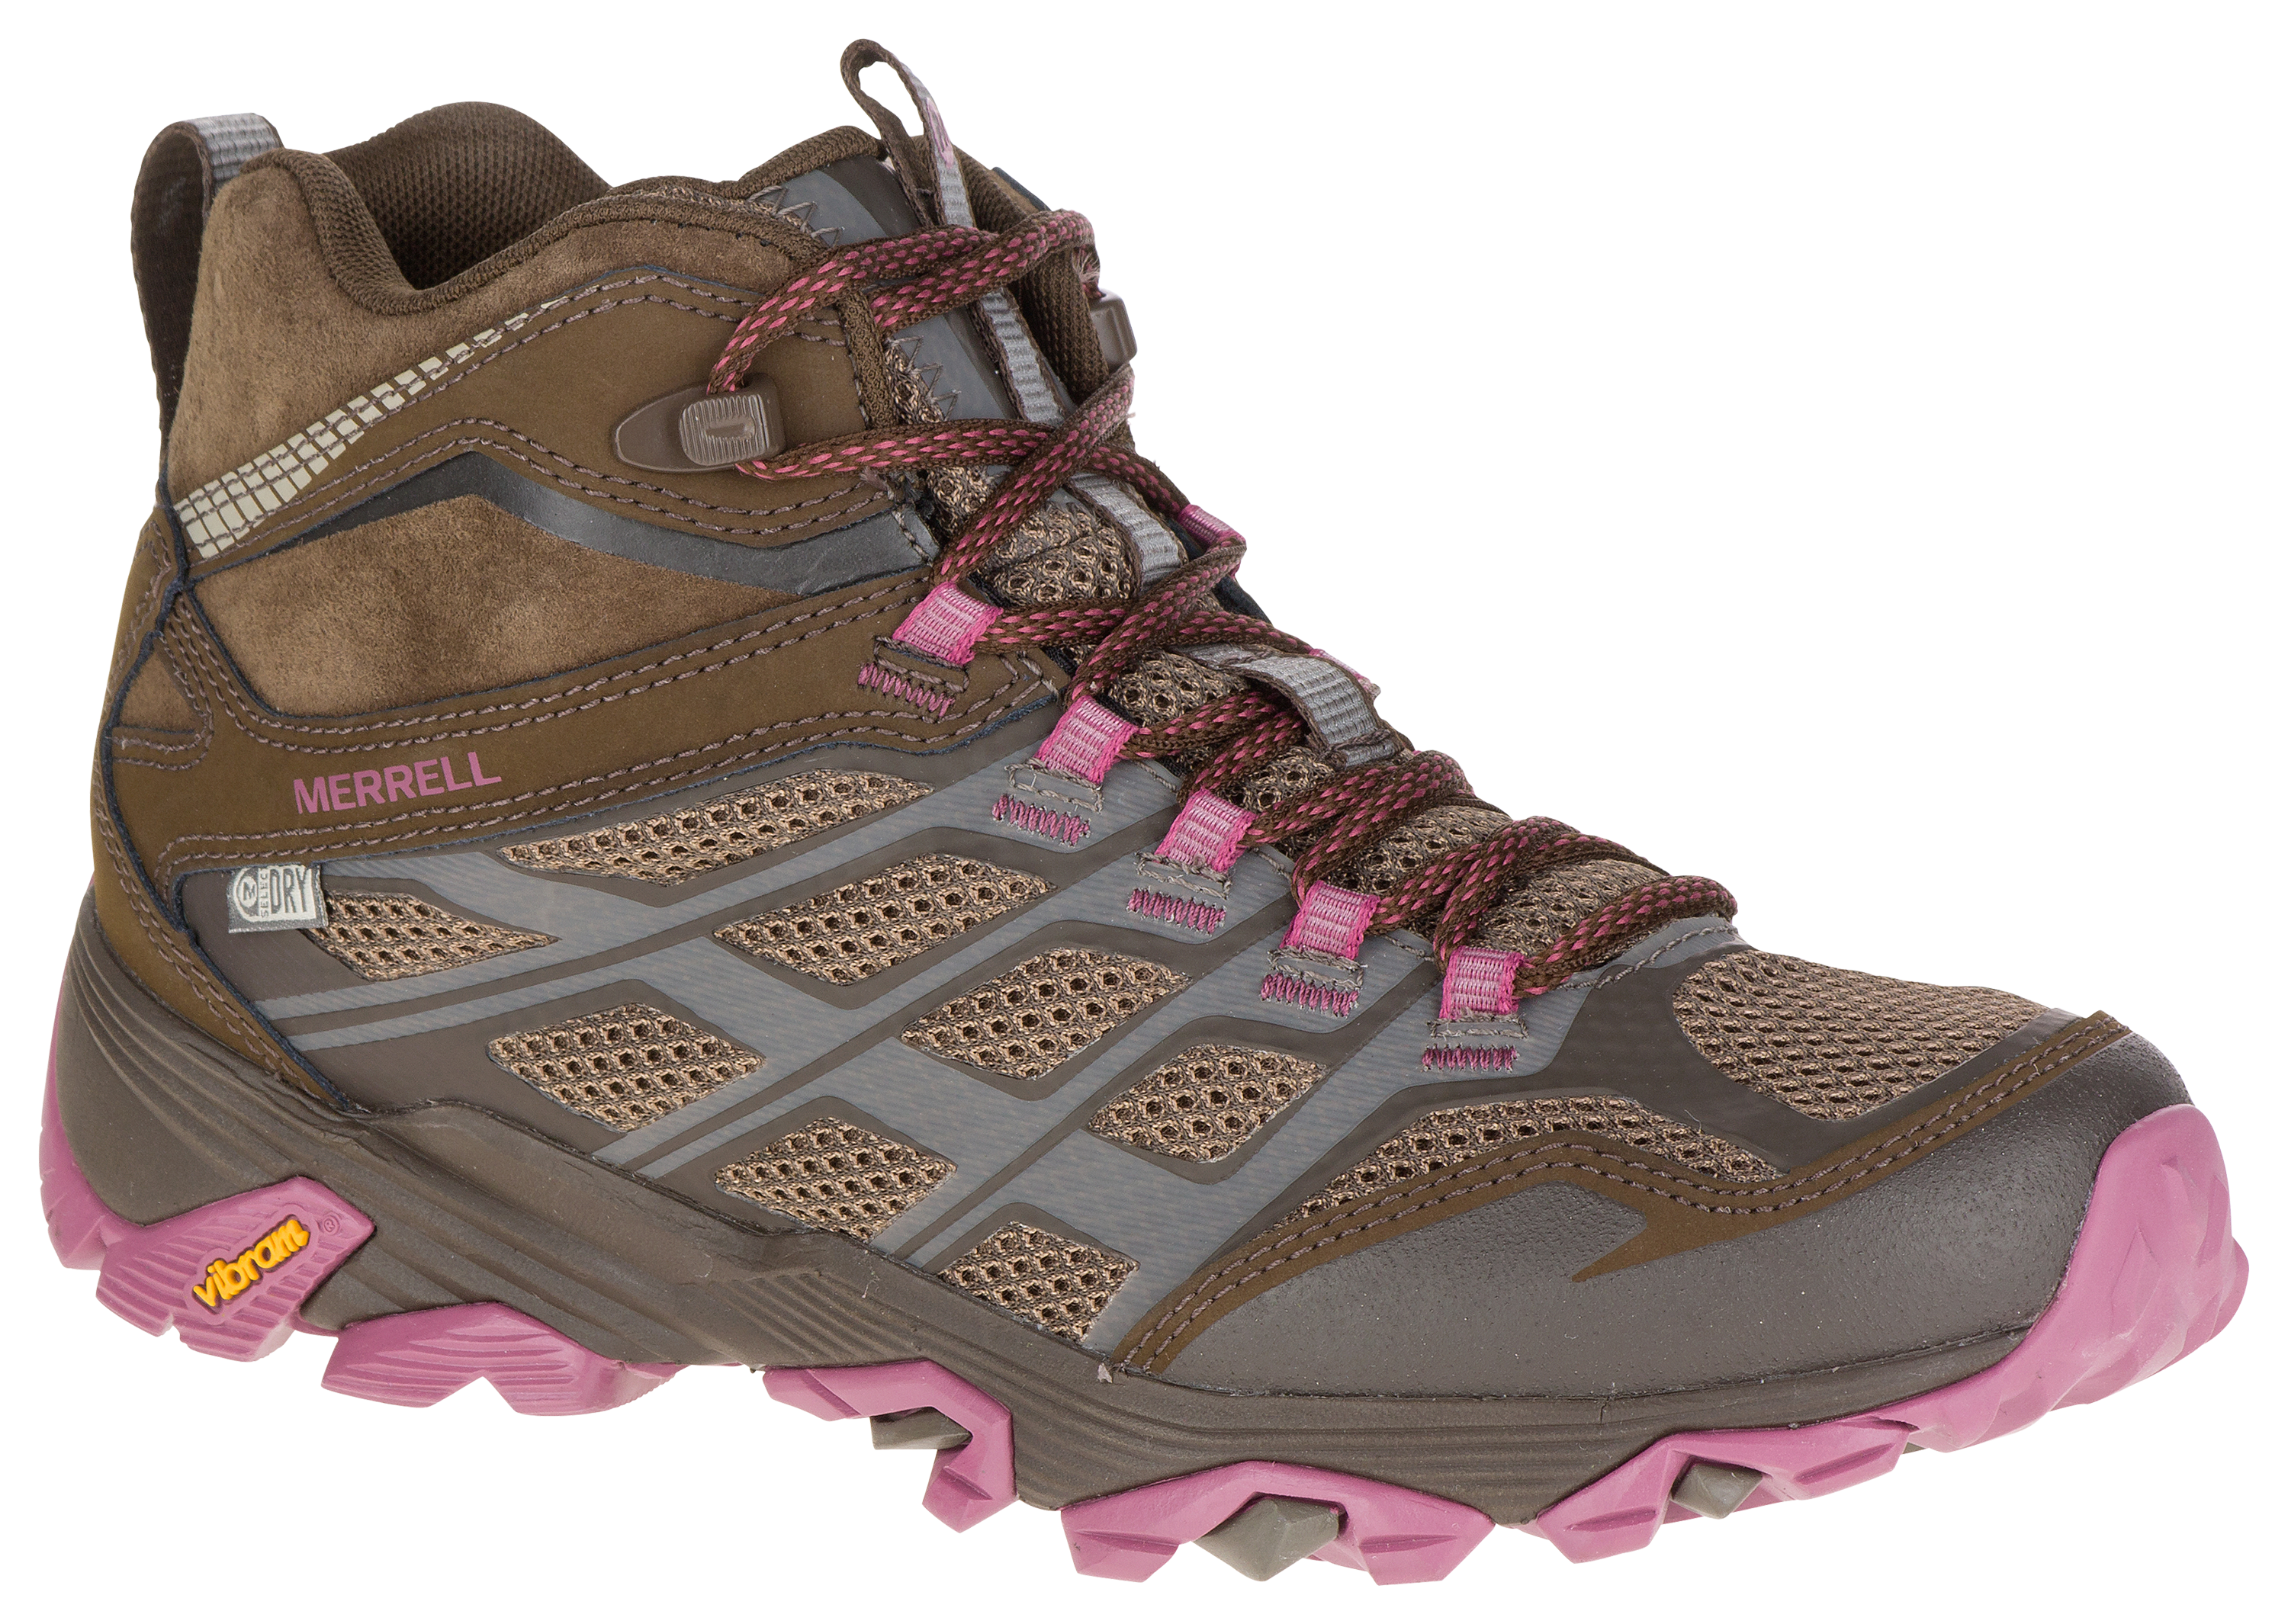 Merrell Moab FST Mid Waterproof Hiking Shoes for Ladies | Bass Pro Shops